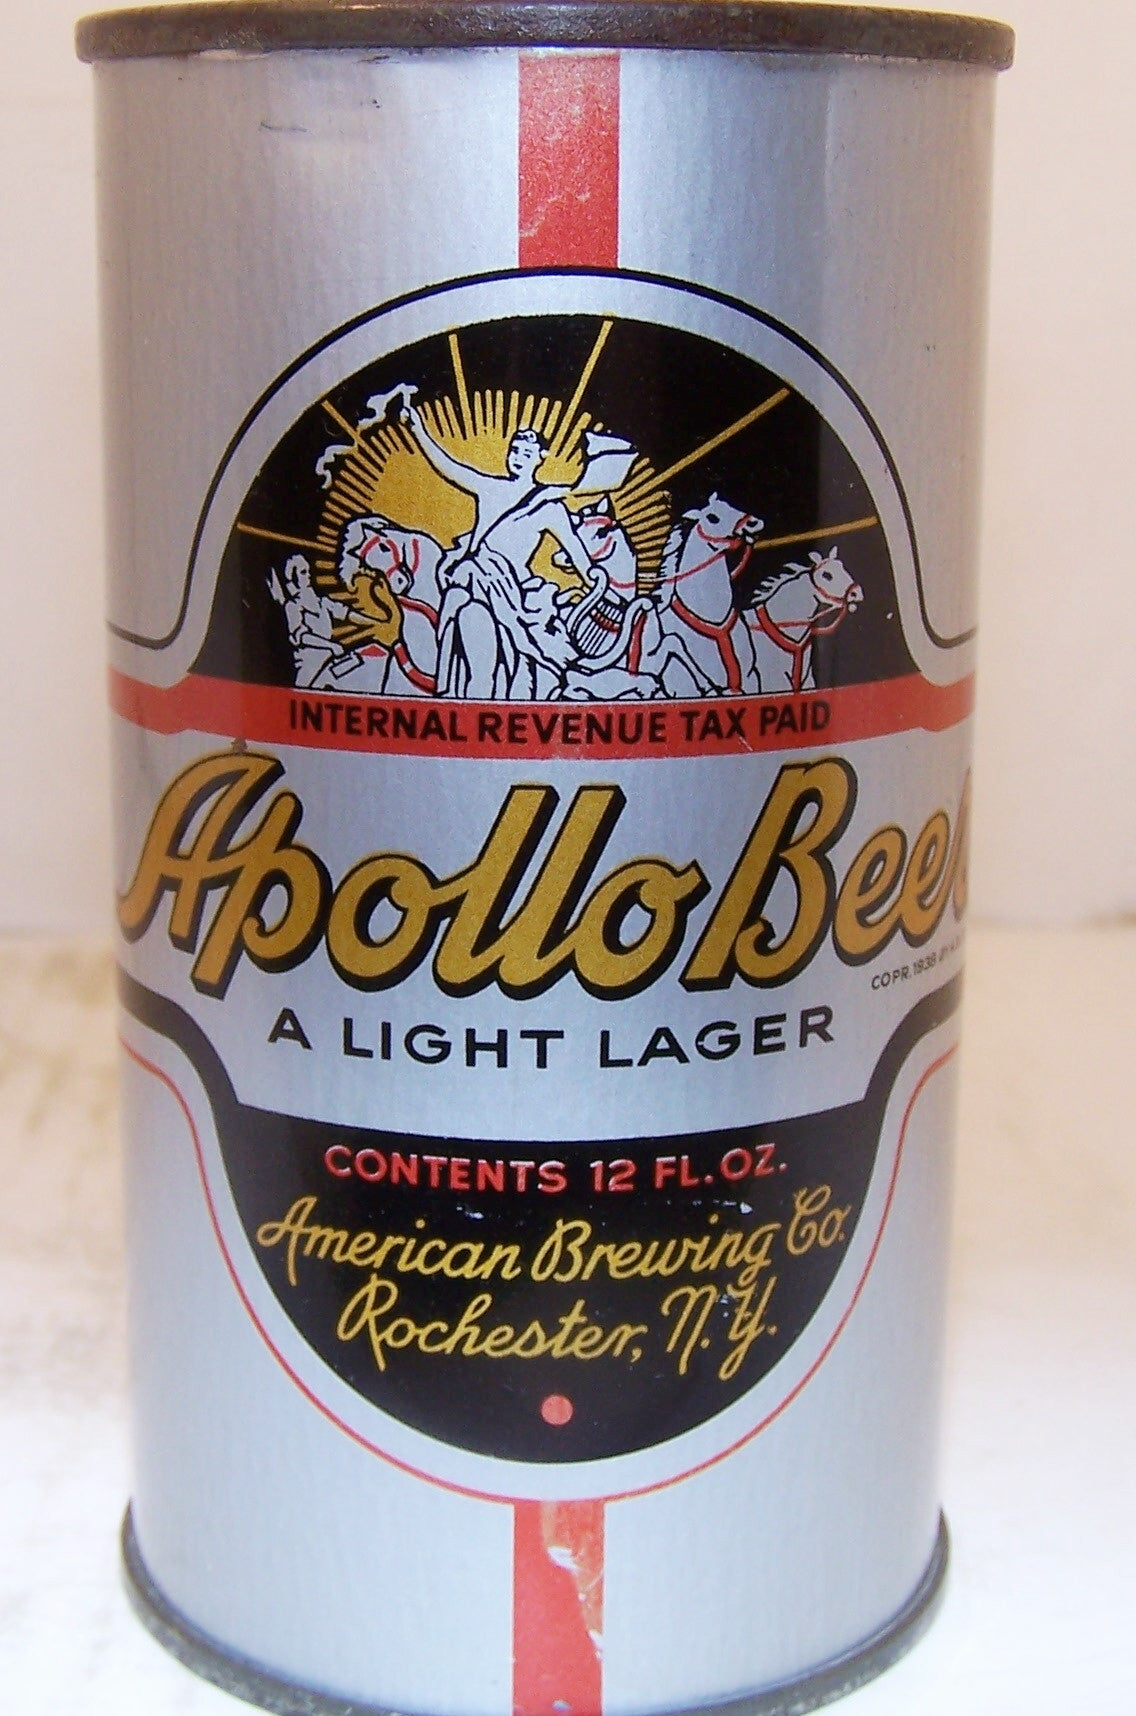 Apollo Beer A light Beer, Lilek page # 40, Grade 1 Sold on 12/18/15